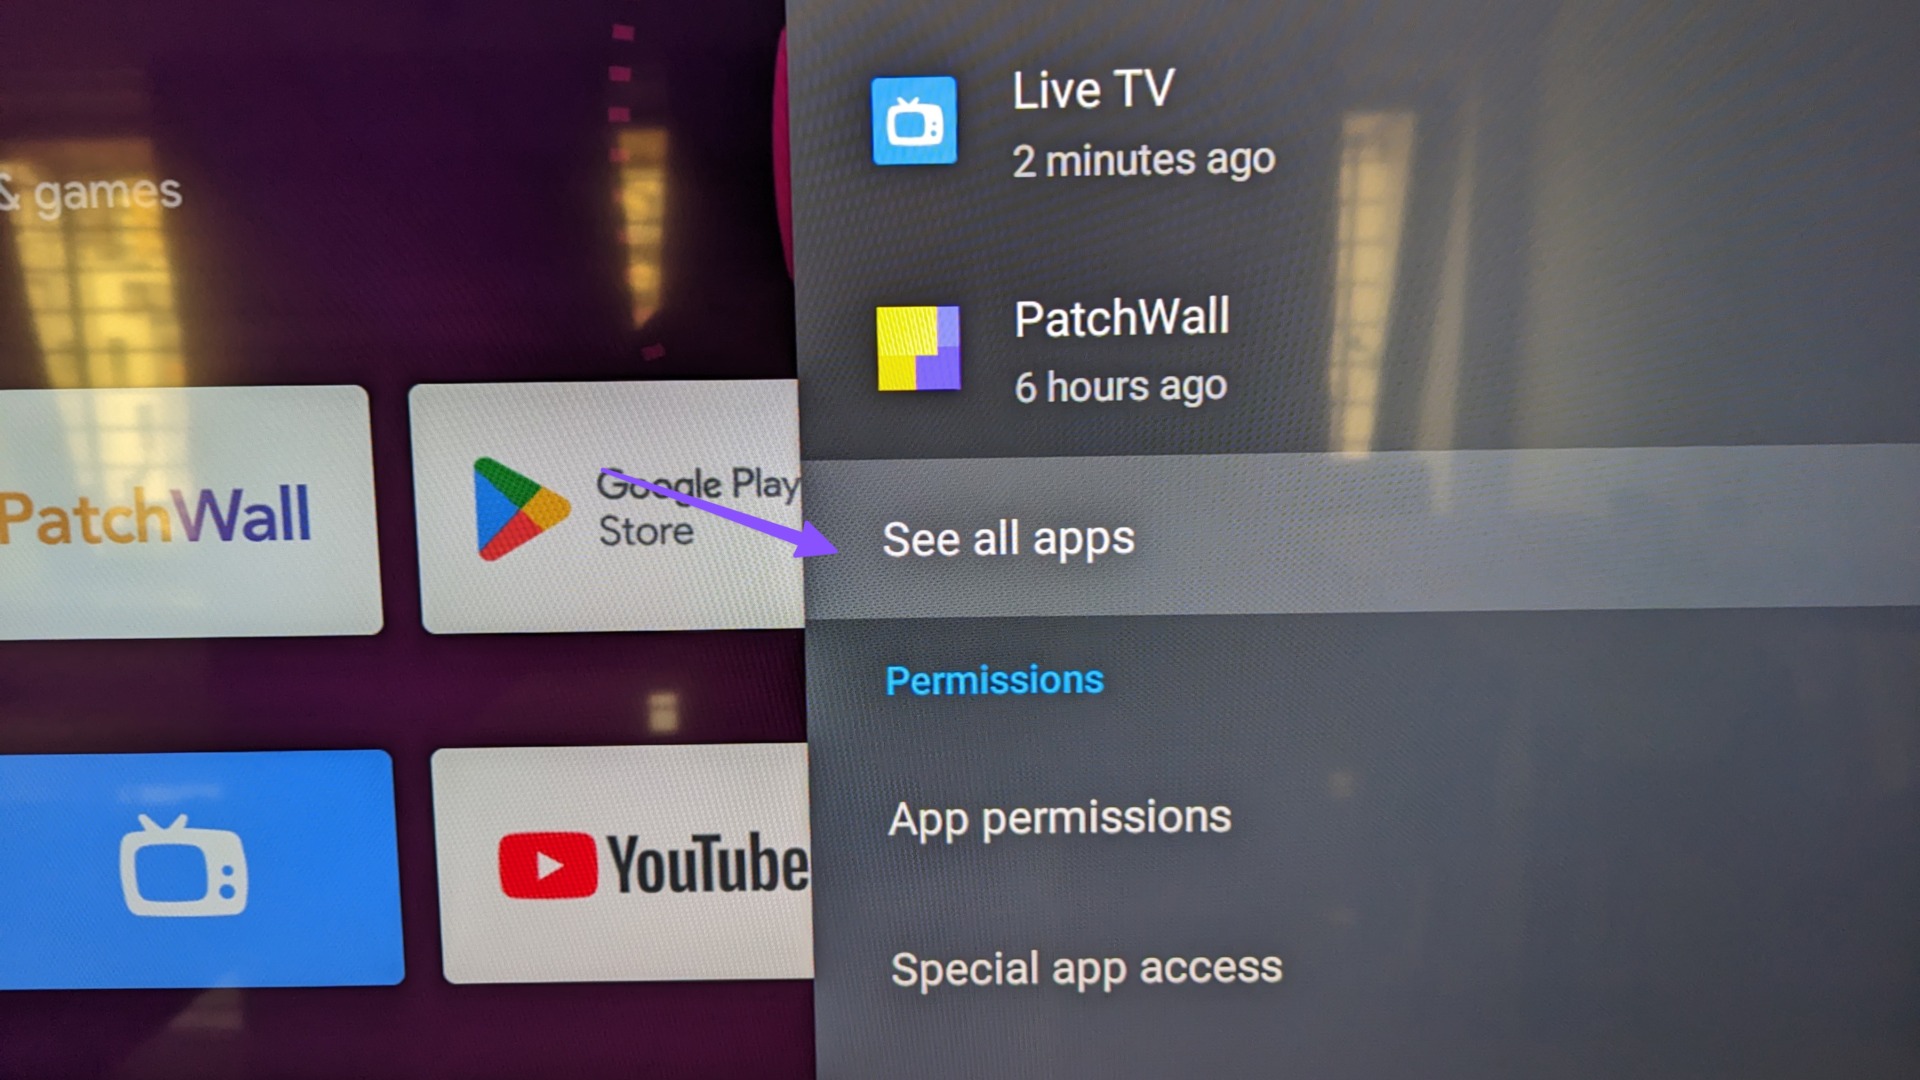 see all apps on Android TV